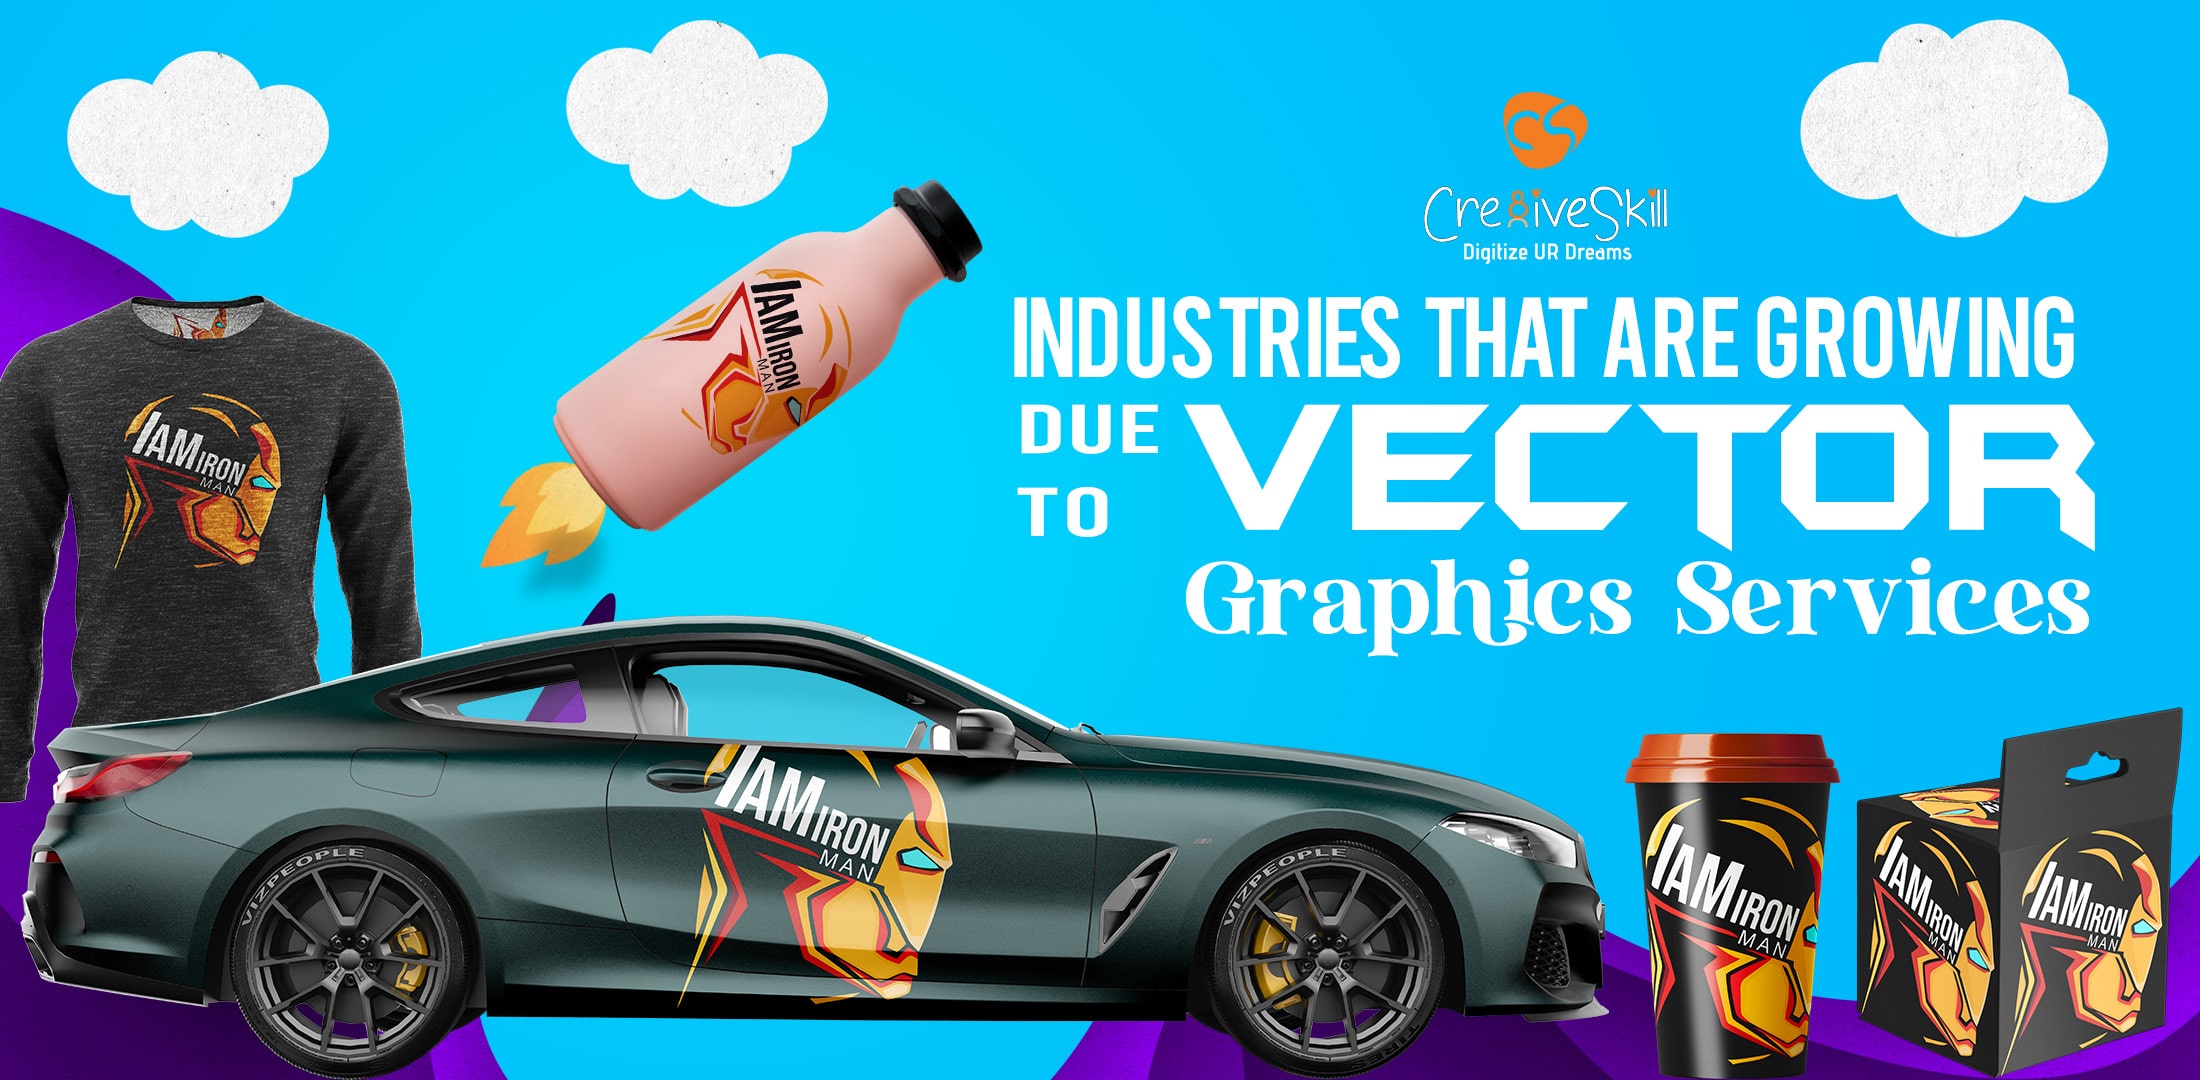 Industries That Are Growing Due To Vector Graphics Services | Cre8iveSkill